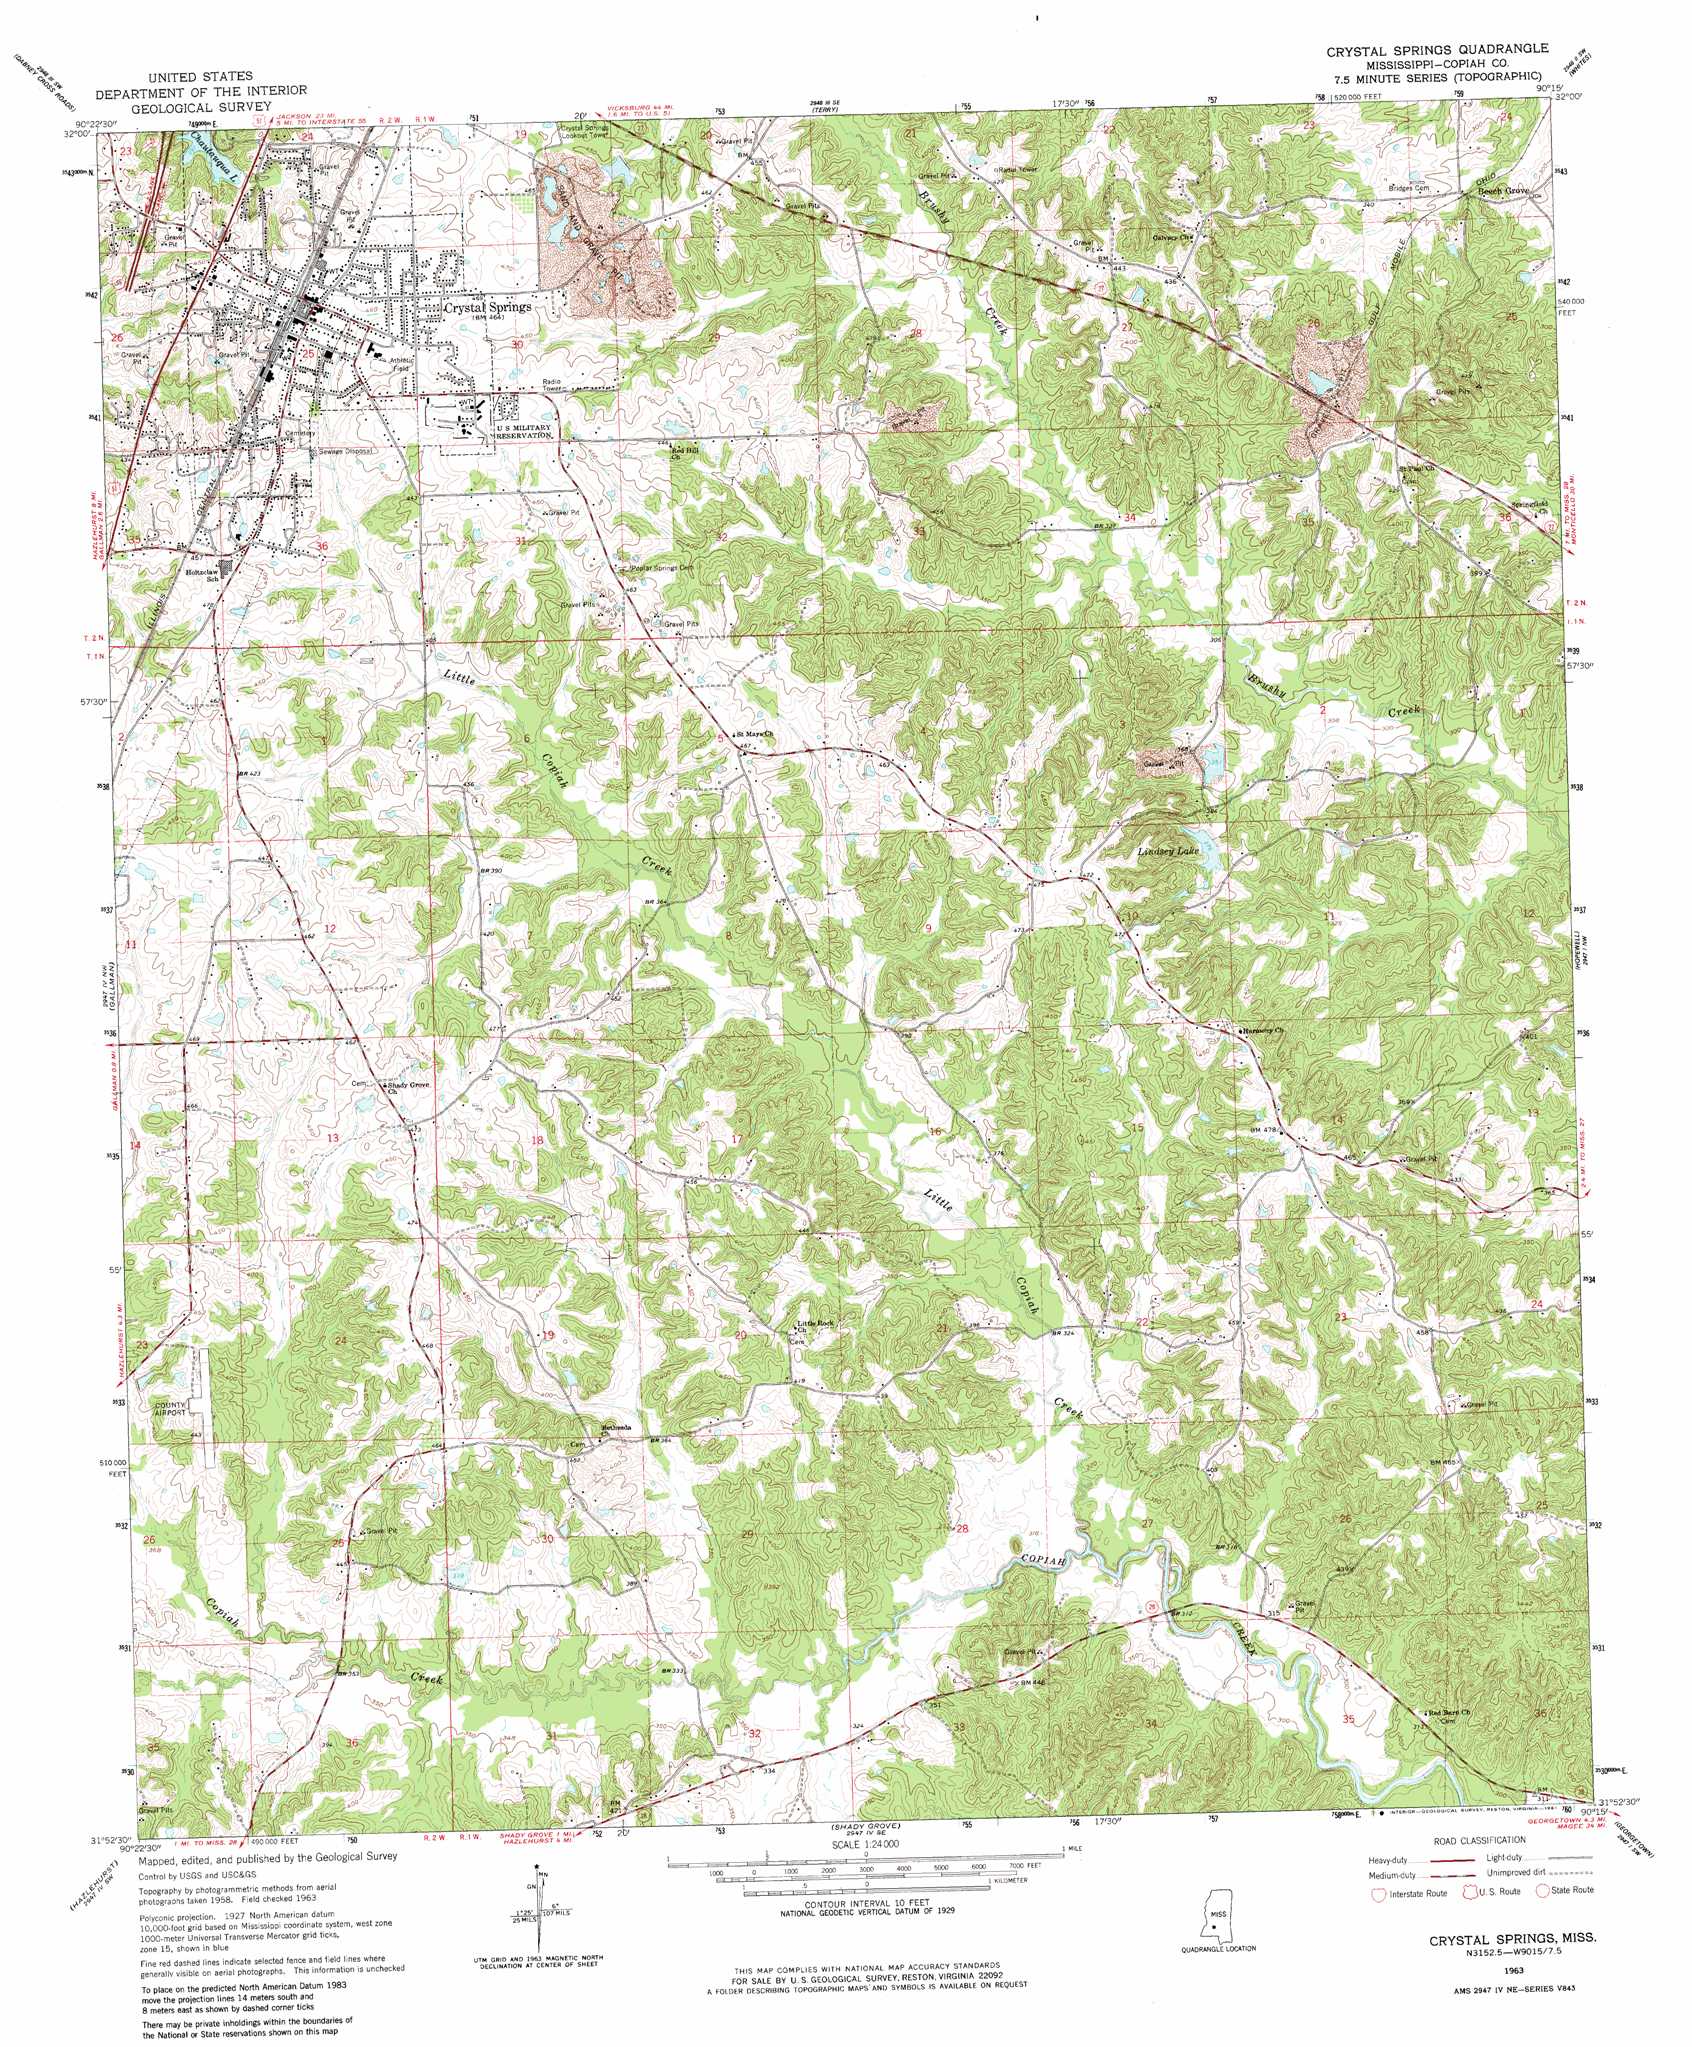 Crystal Springs topographic map, MS - USGS Topo Quad 31090h3